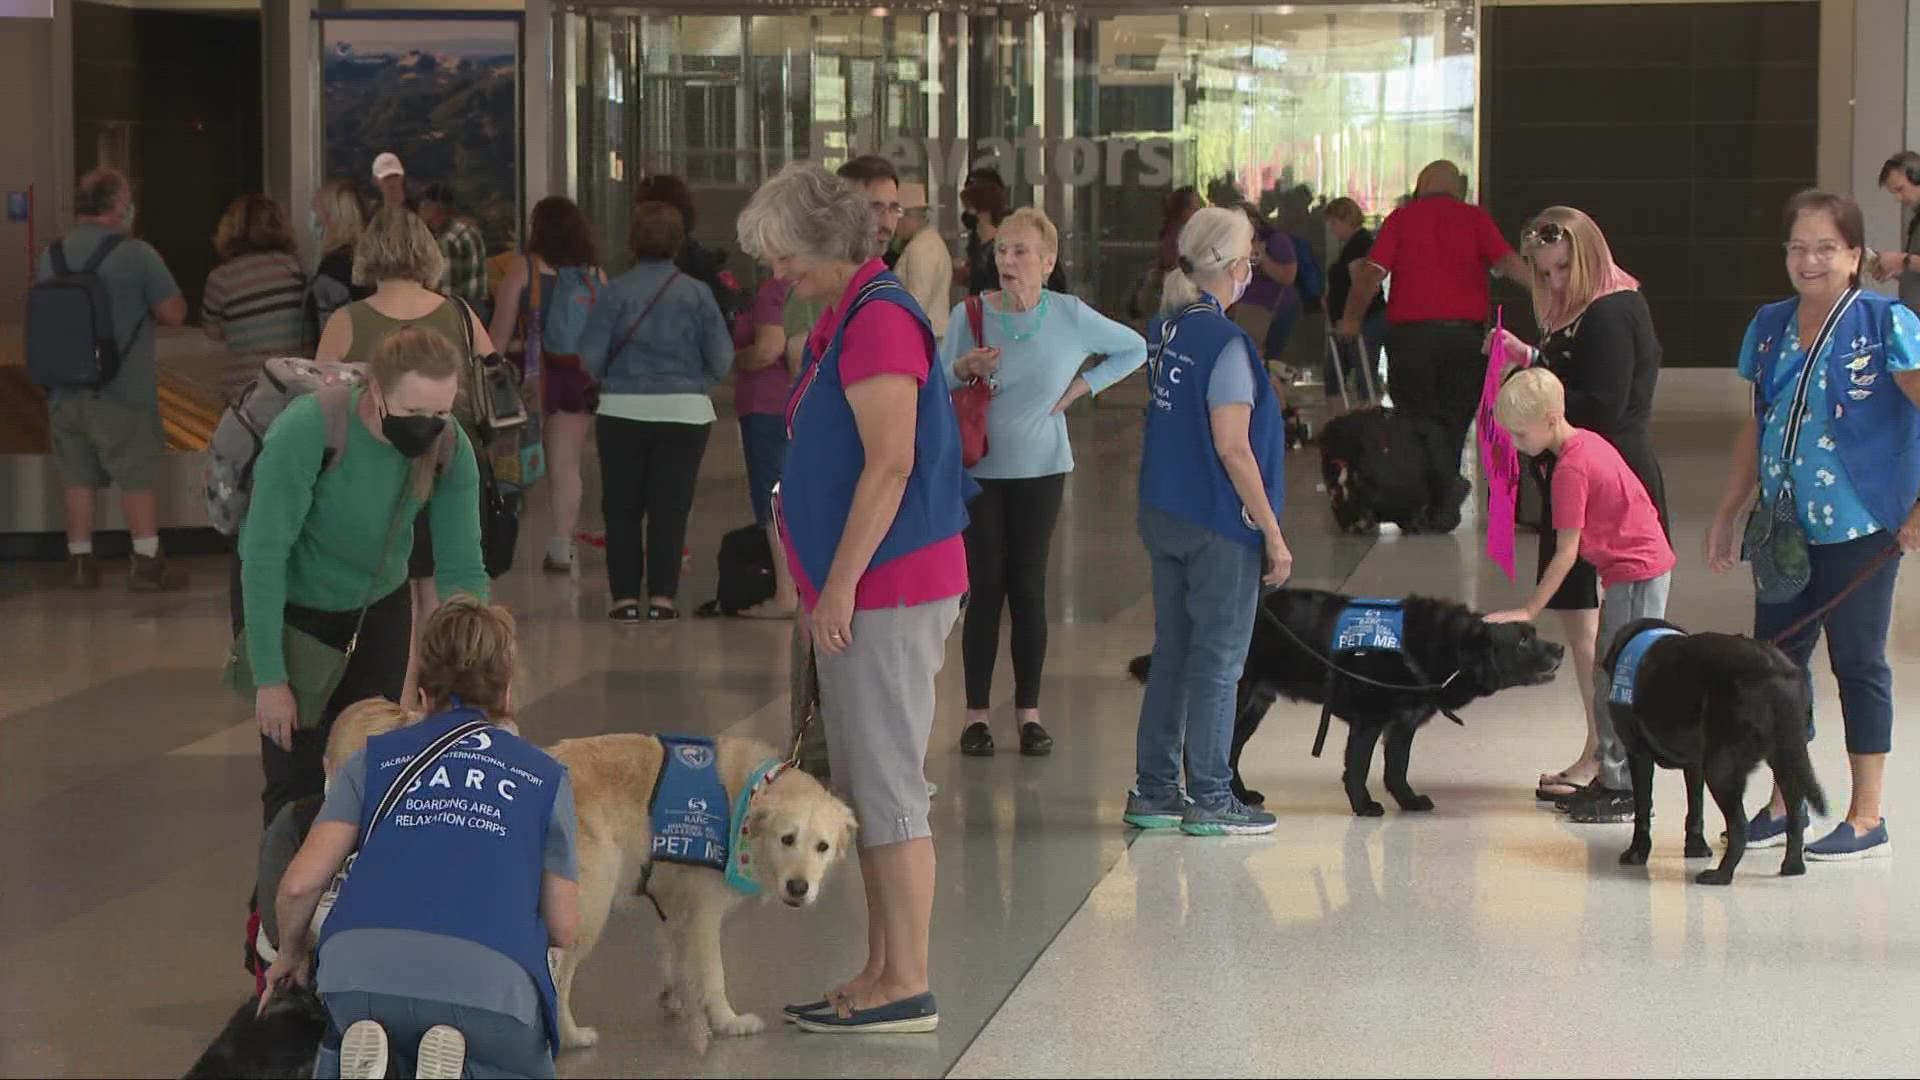 The airport says to make sure the dog's vests say "pet me" and they're not one of the security dogs.